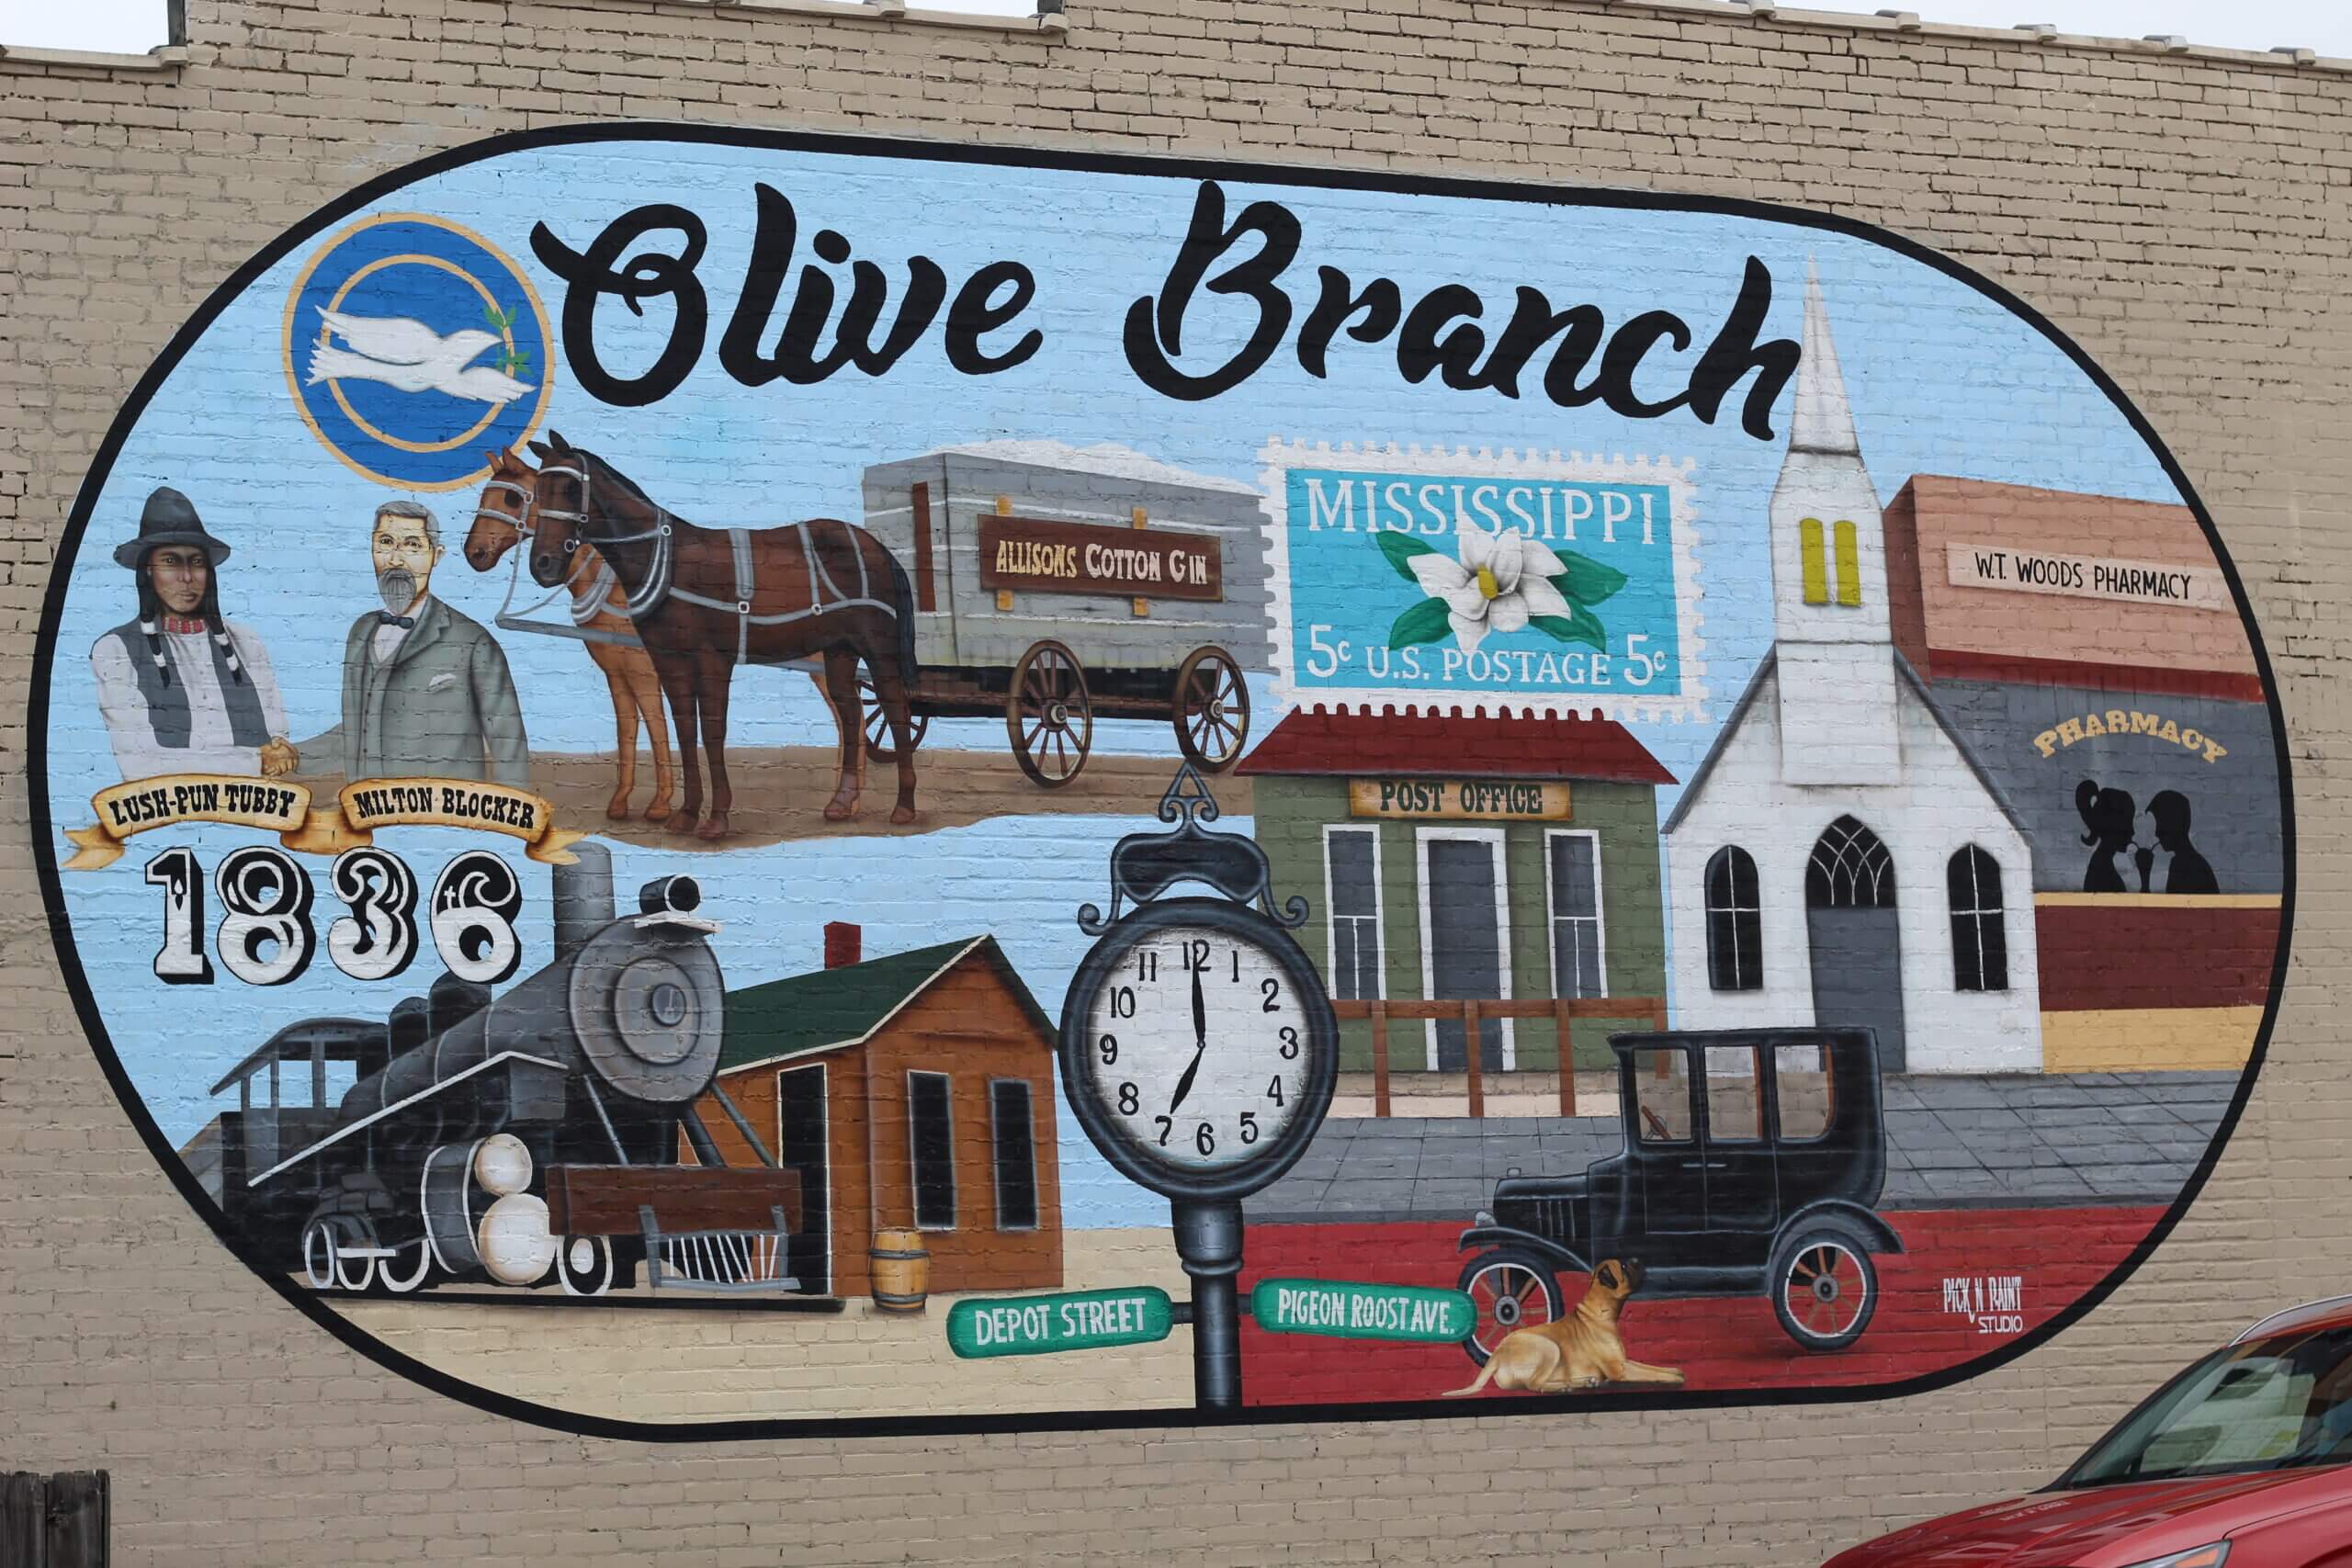 People For Parks vote is Tuesday in Olive Branch